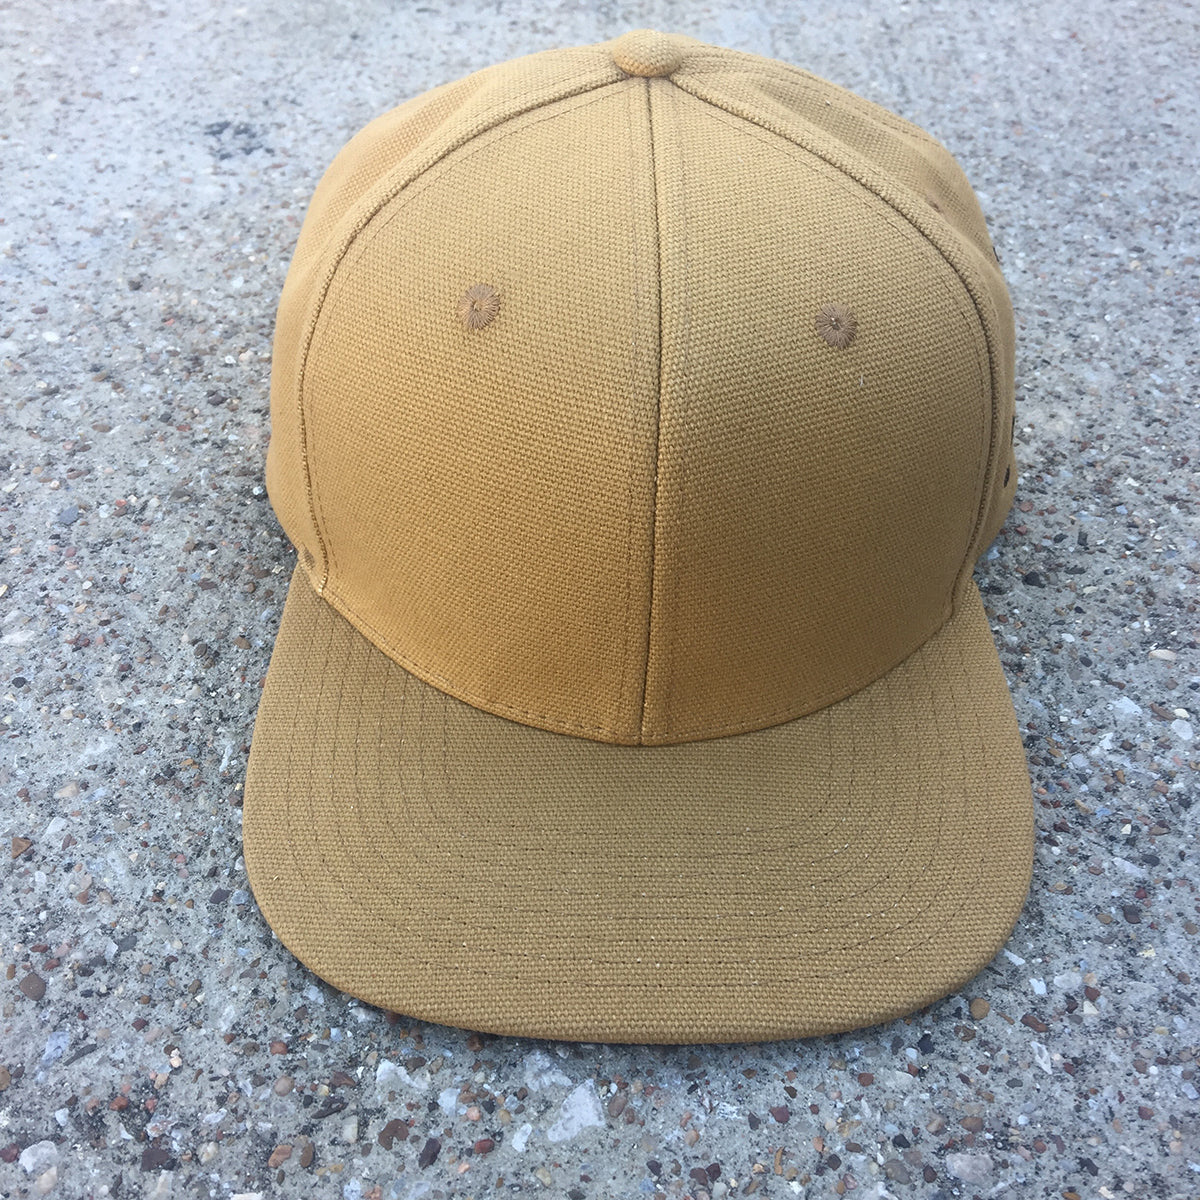 15oz USA Duck Canvas Snapback HAT Embroidery Patch